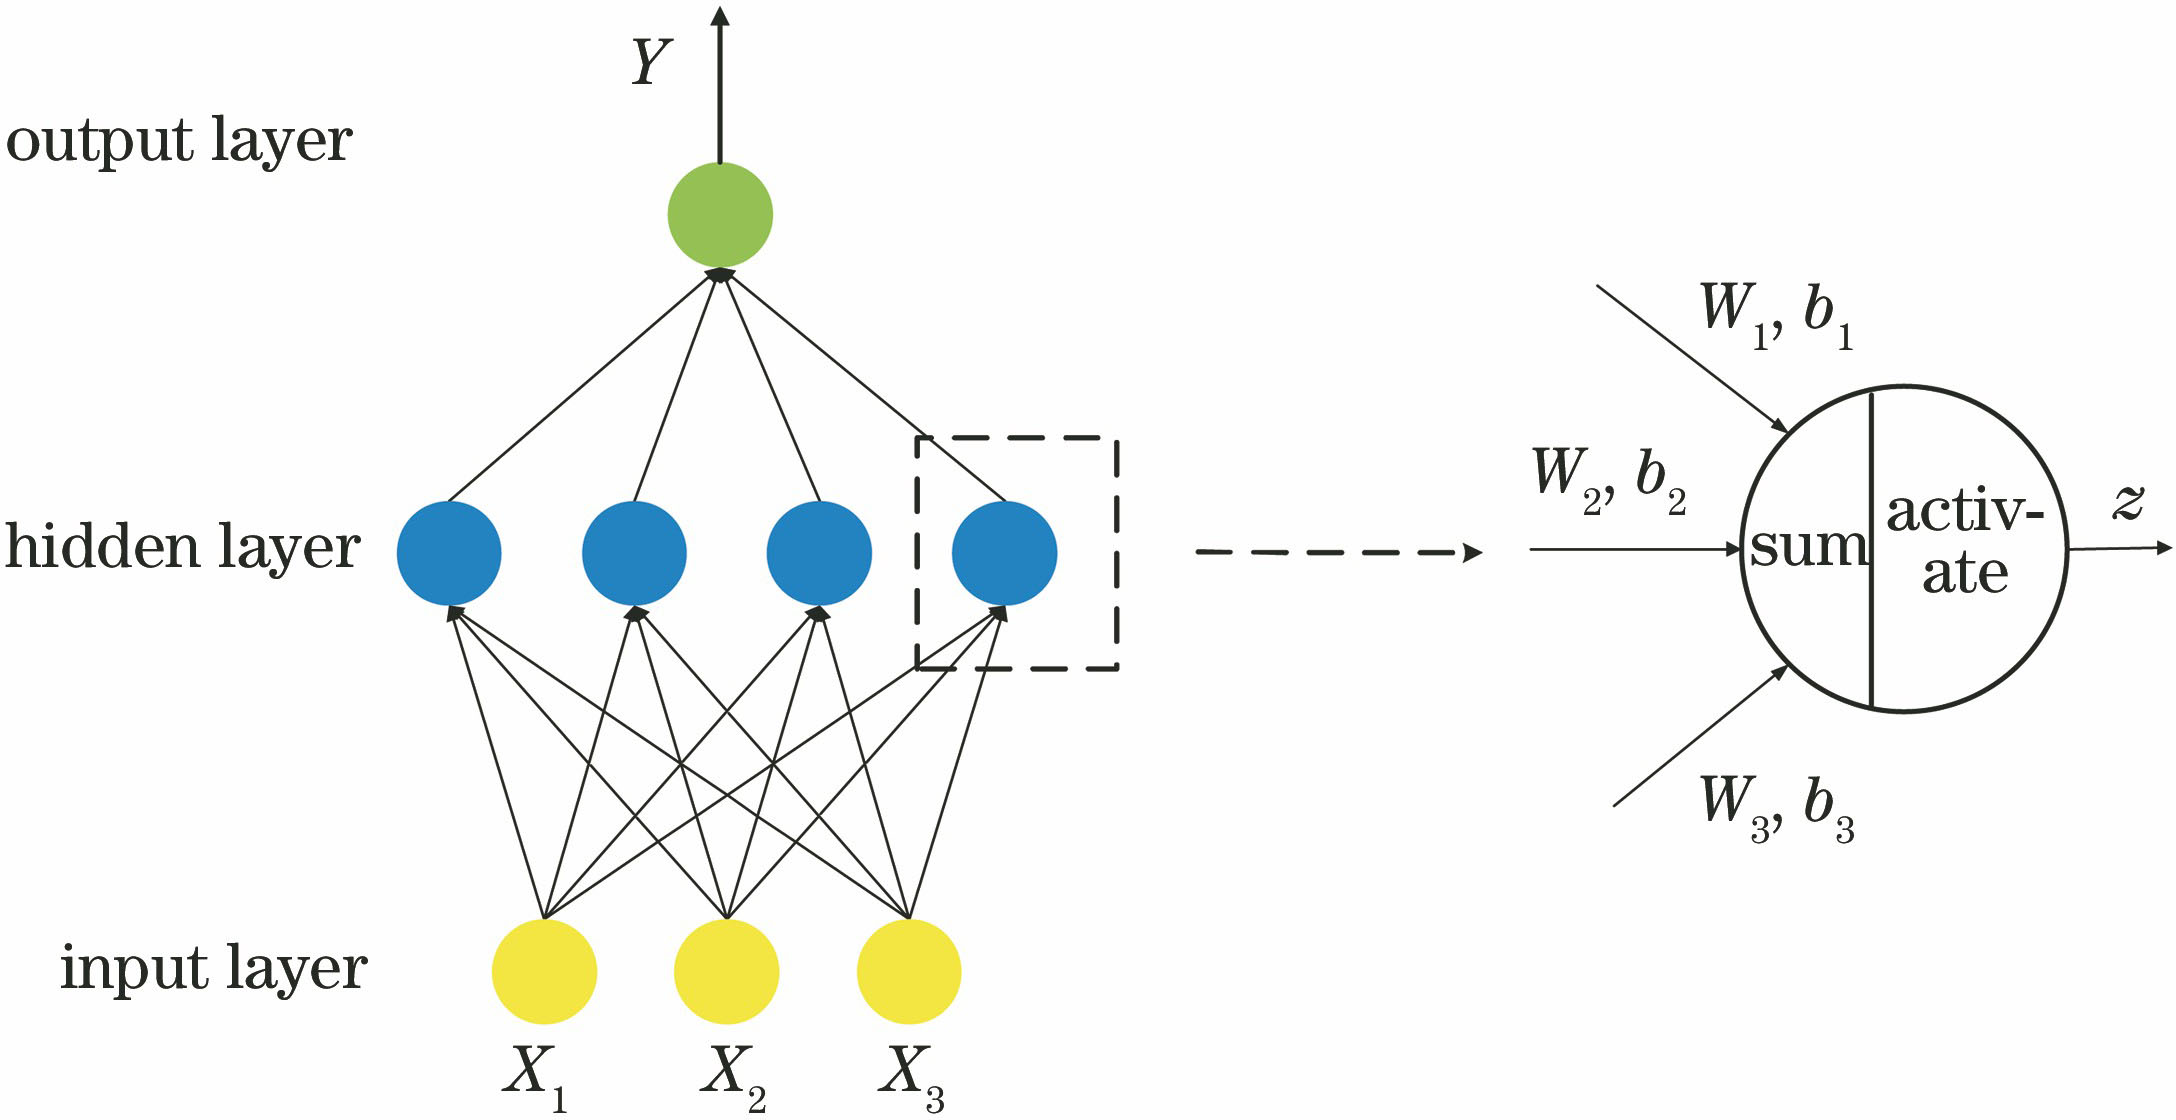 Model of shallow neural network